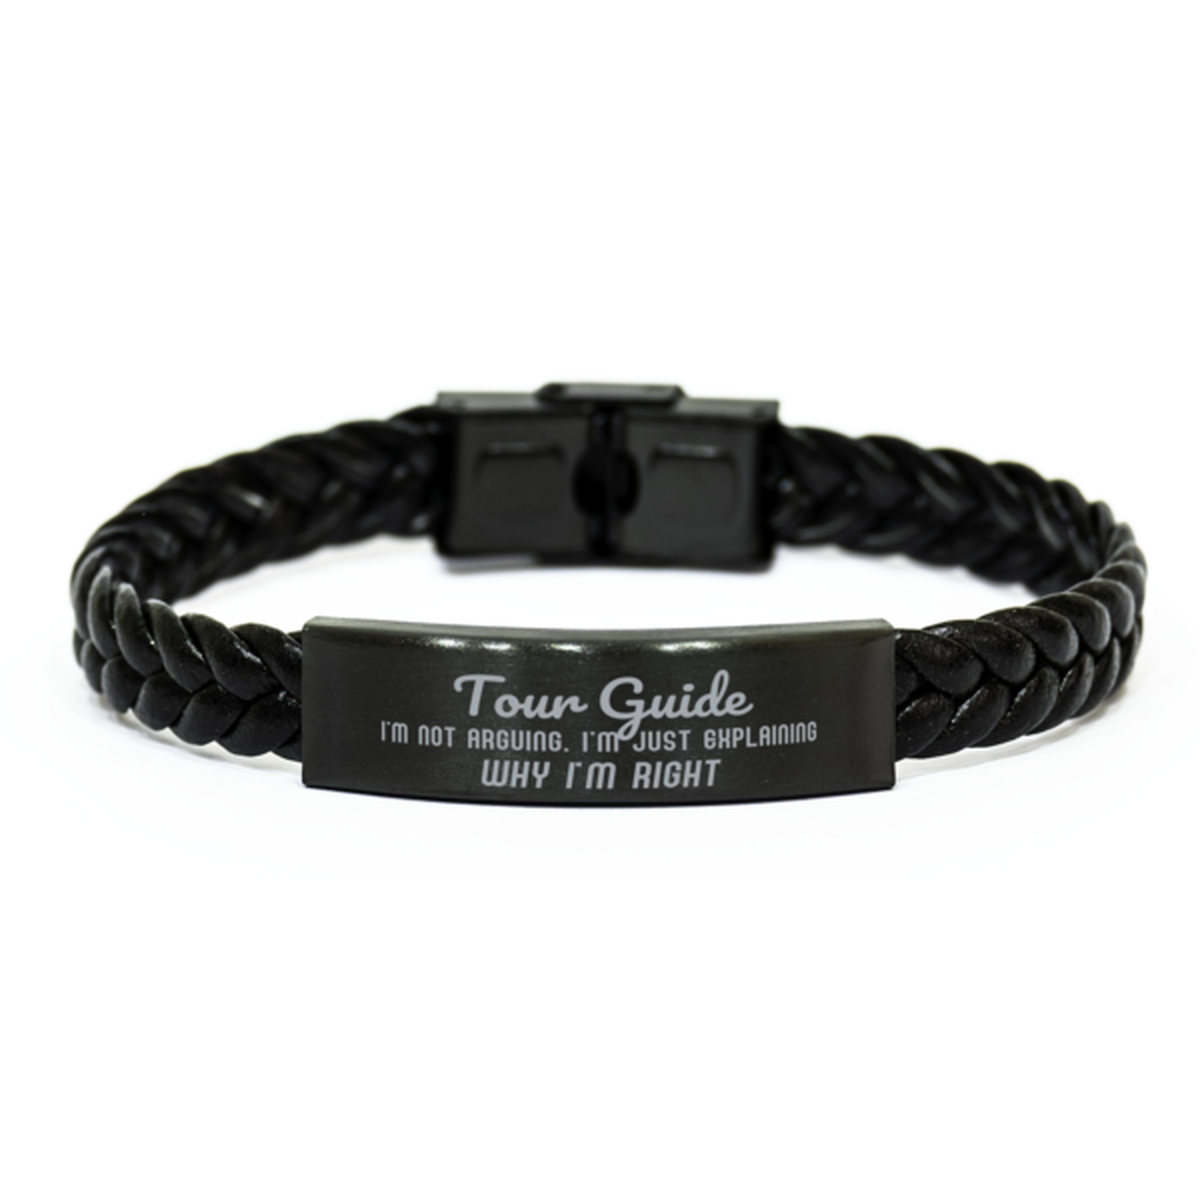 Tour Guide I'm not Arguing. I'm Just Explaining Why I'm RIGHT Braided Leather Bracelet, Graduation Birthday Christmas Tour Guide Gifts For Tour Guide Funny Saying Quote Present for Men Women Coworker